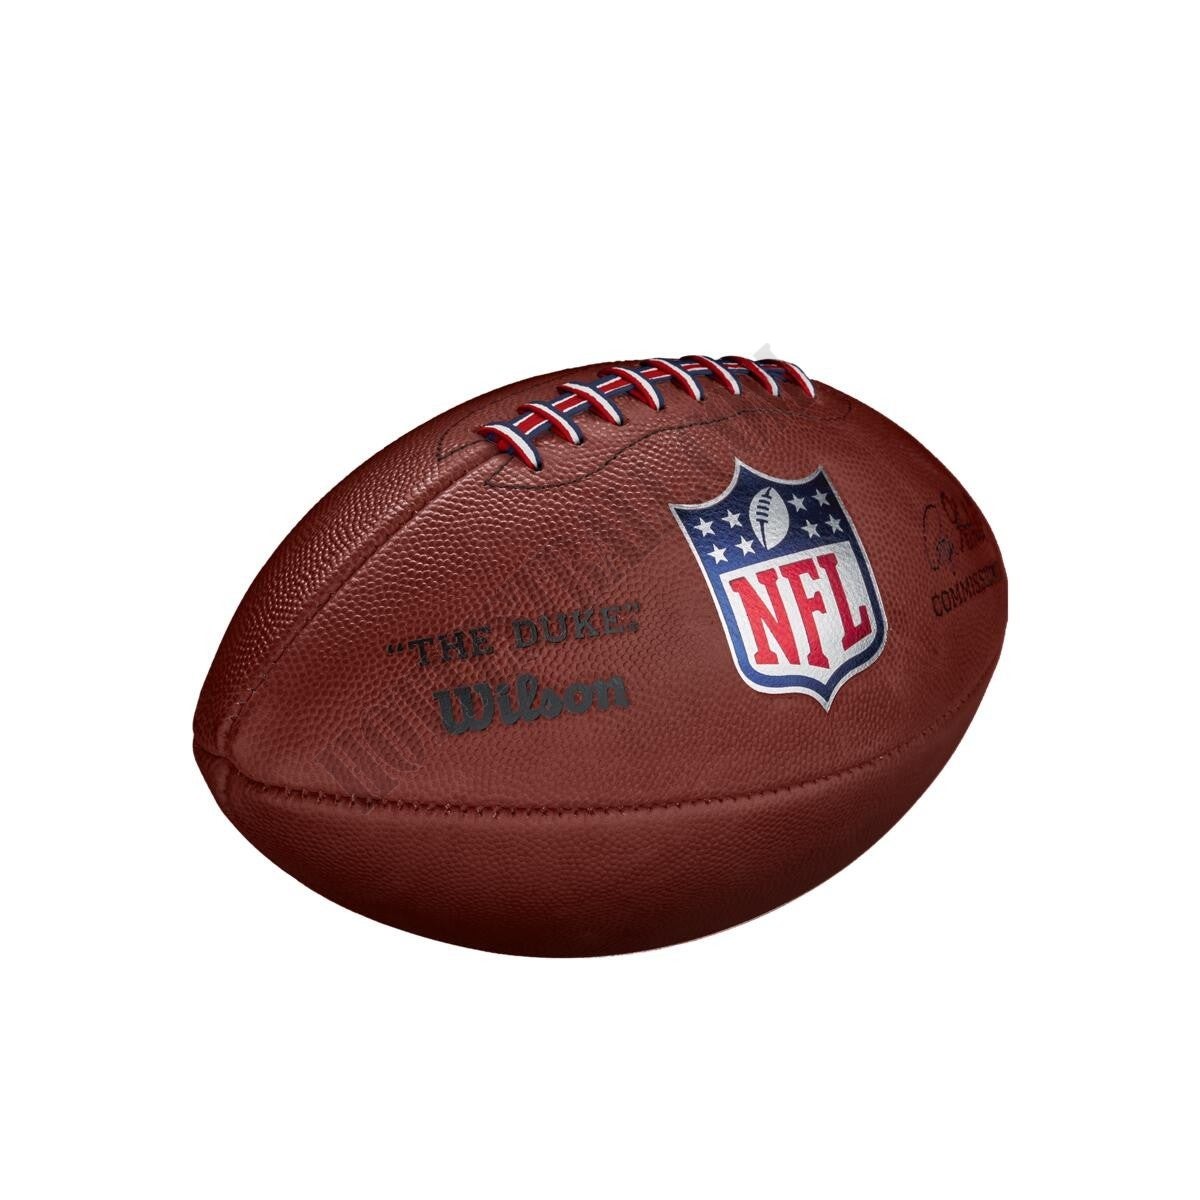 The Duke NFL Football Limited Edition - Wilson Discount Store - -4